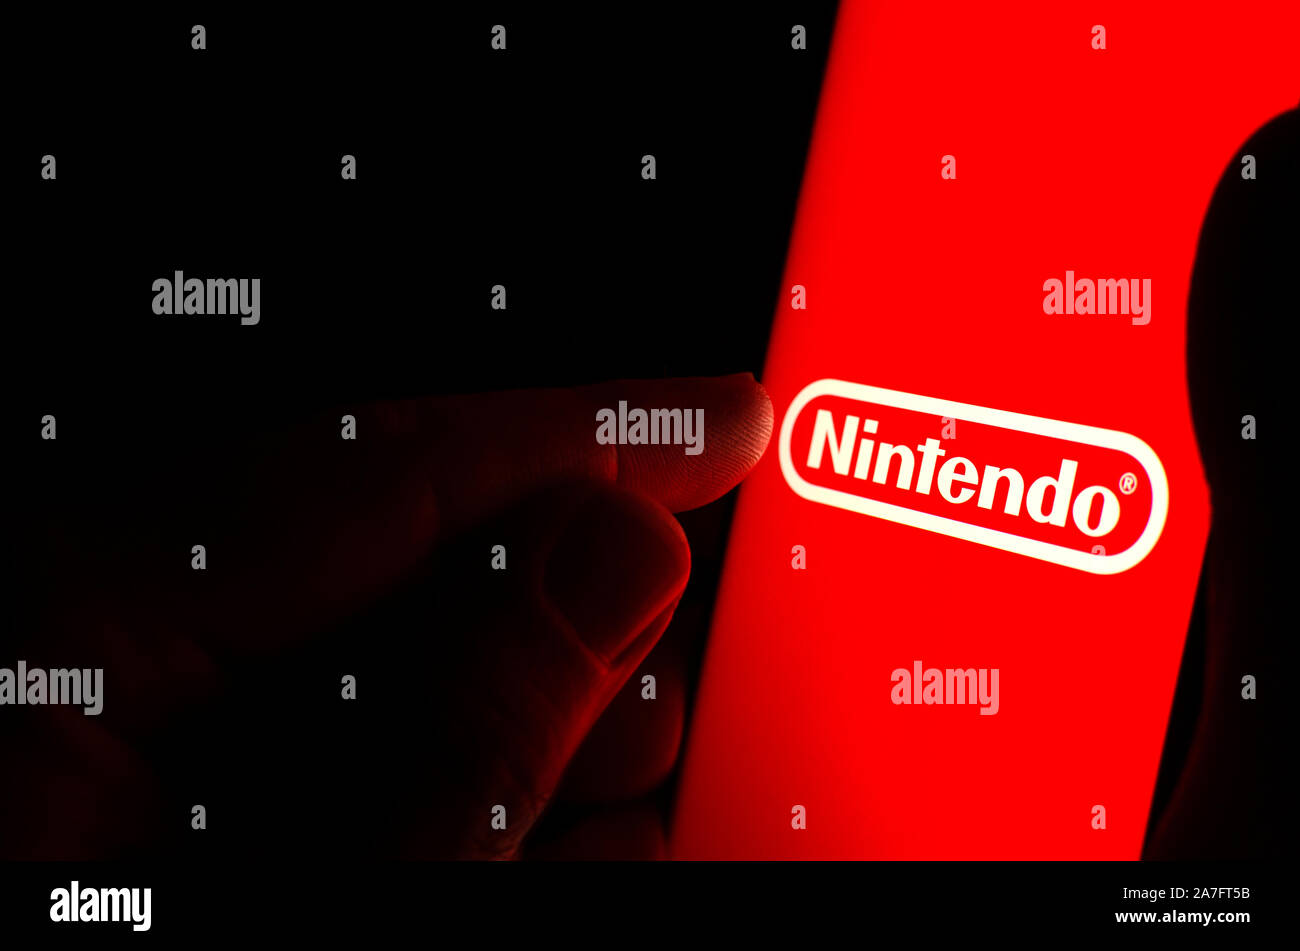 Nintendo logo on a red smartphone screen in a dark room and a finger touching it. Stock Photo